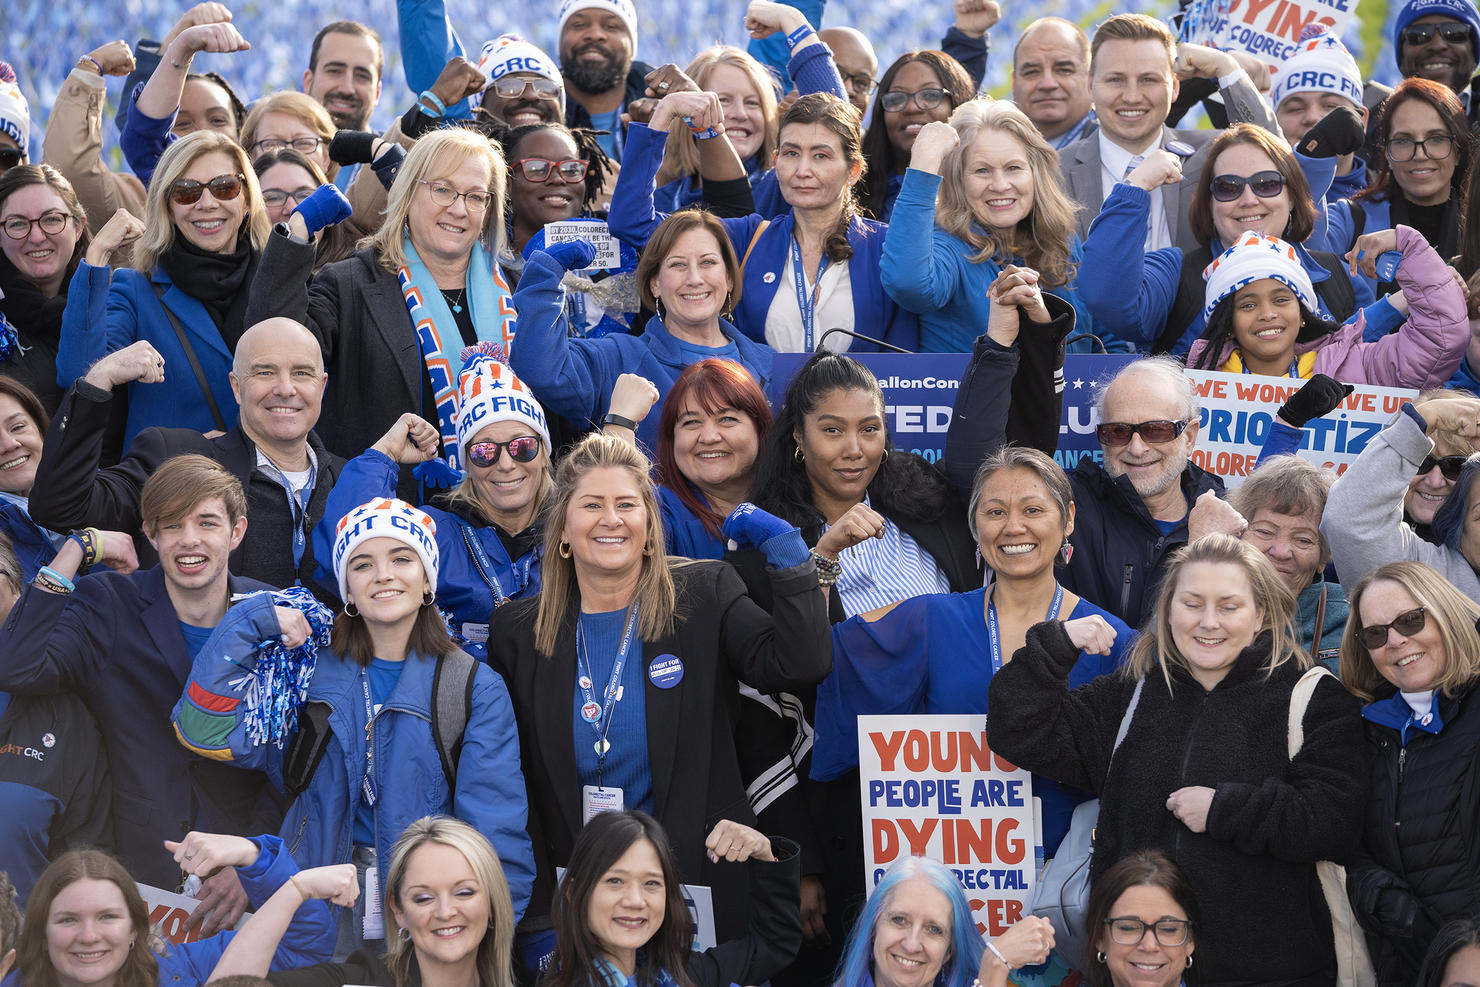 Volunteers and advocates for colorectal cancer awareness gather on Capitol Hill